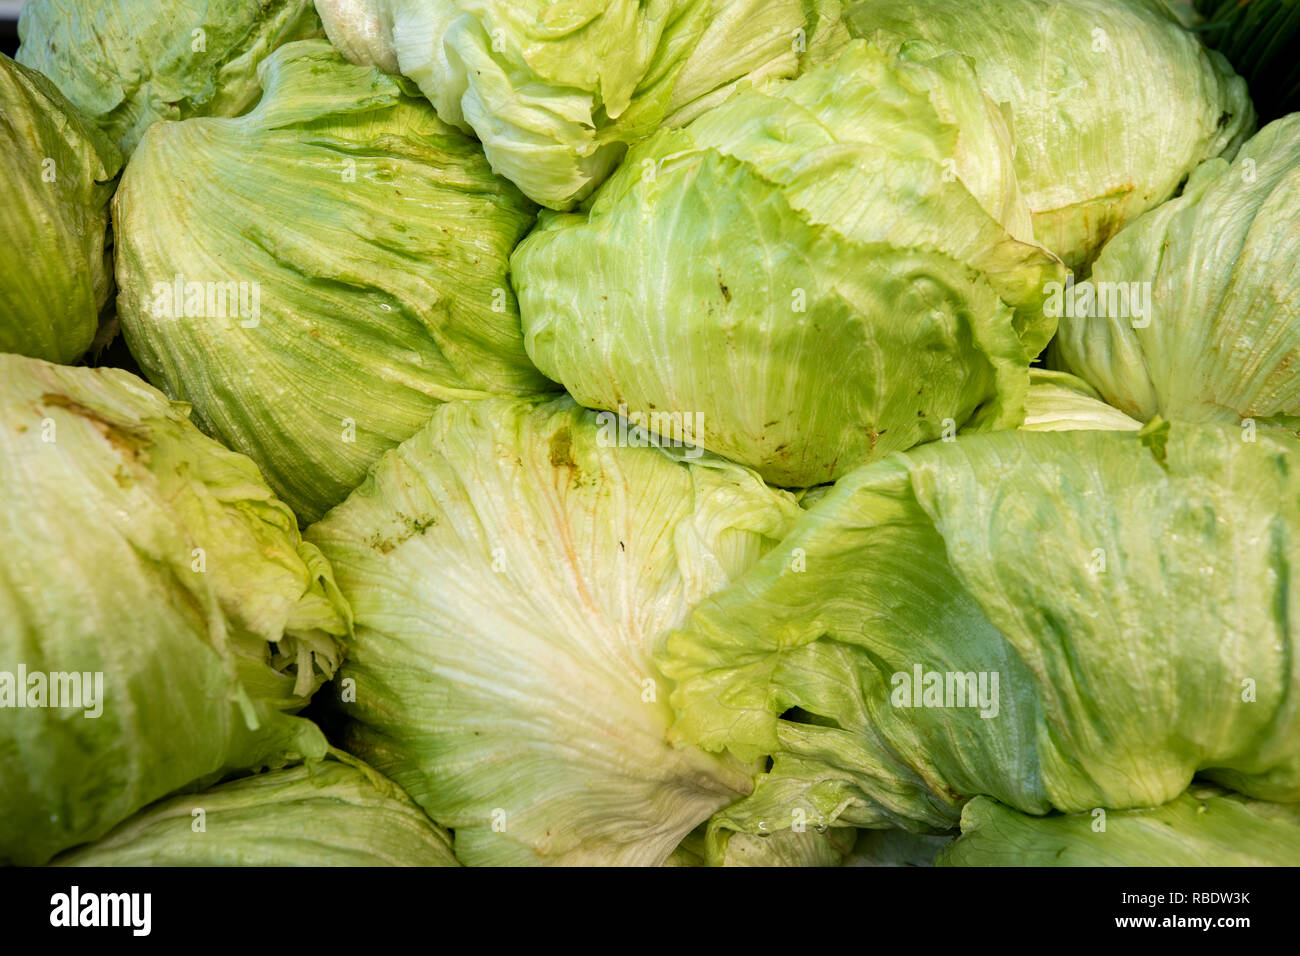 Iceberg lettuce. Vegetables produced in Mexico.  Picture taken in a street market. Tlacolula municipality, Oaxaca, Mexico. Stock Photo